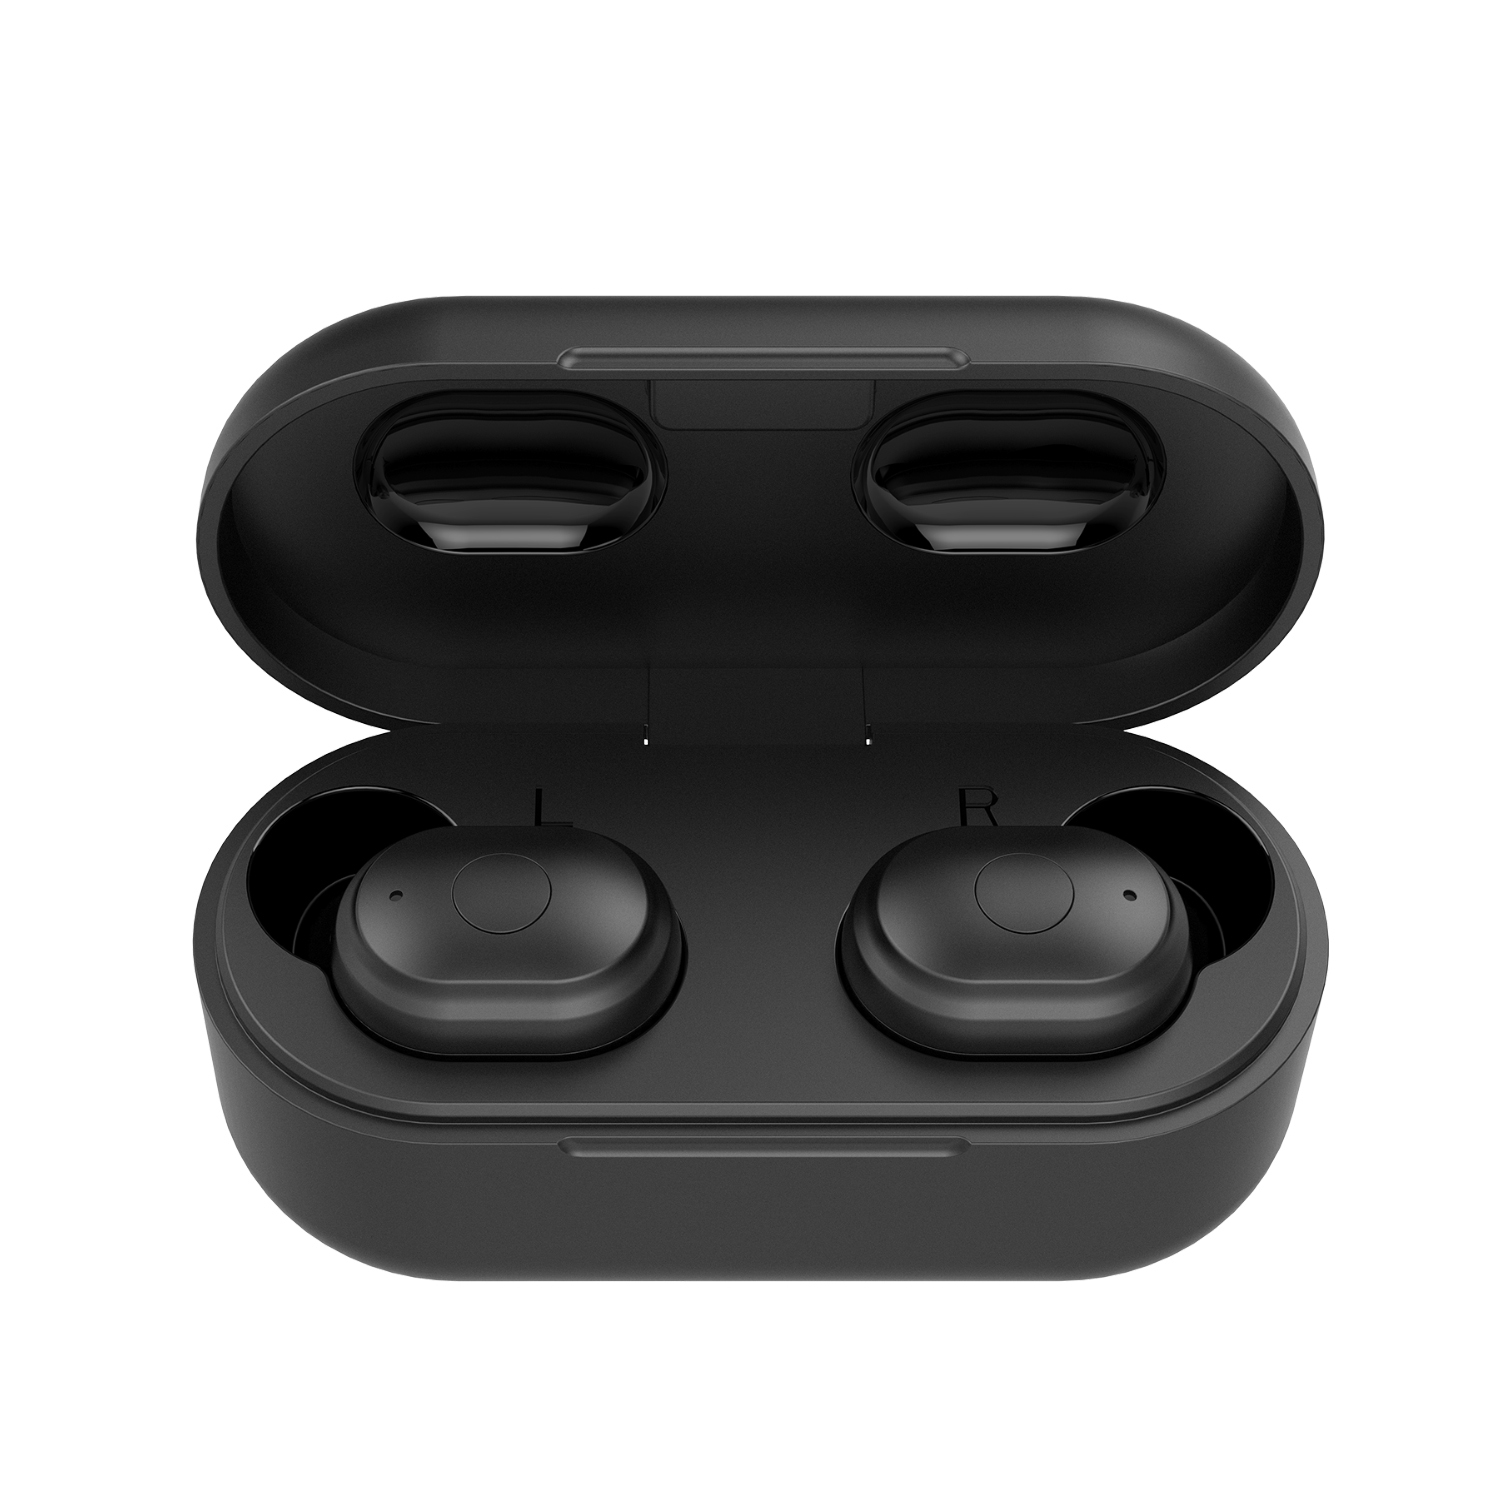 Mixcder T1 Wireless Earbuds - black in case